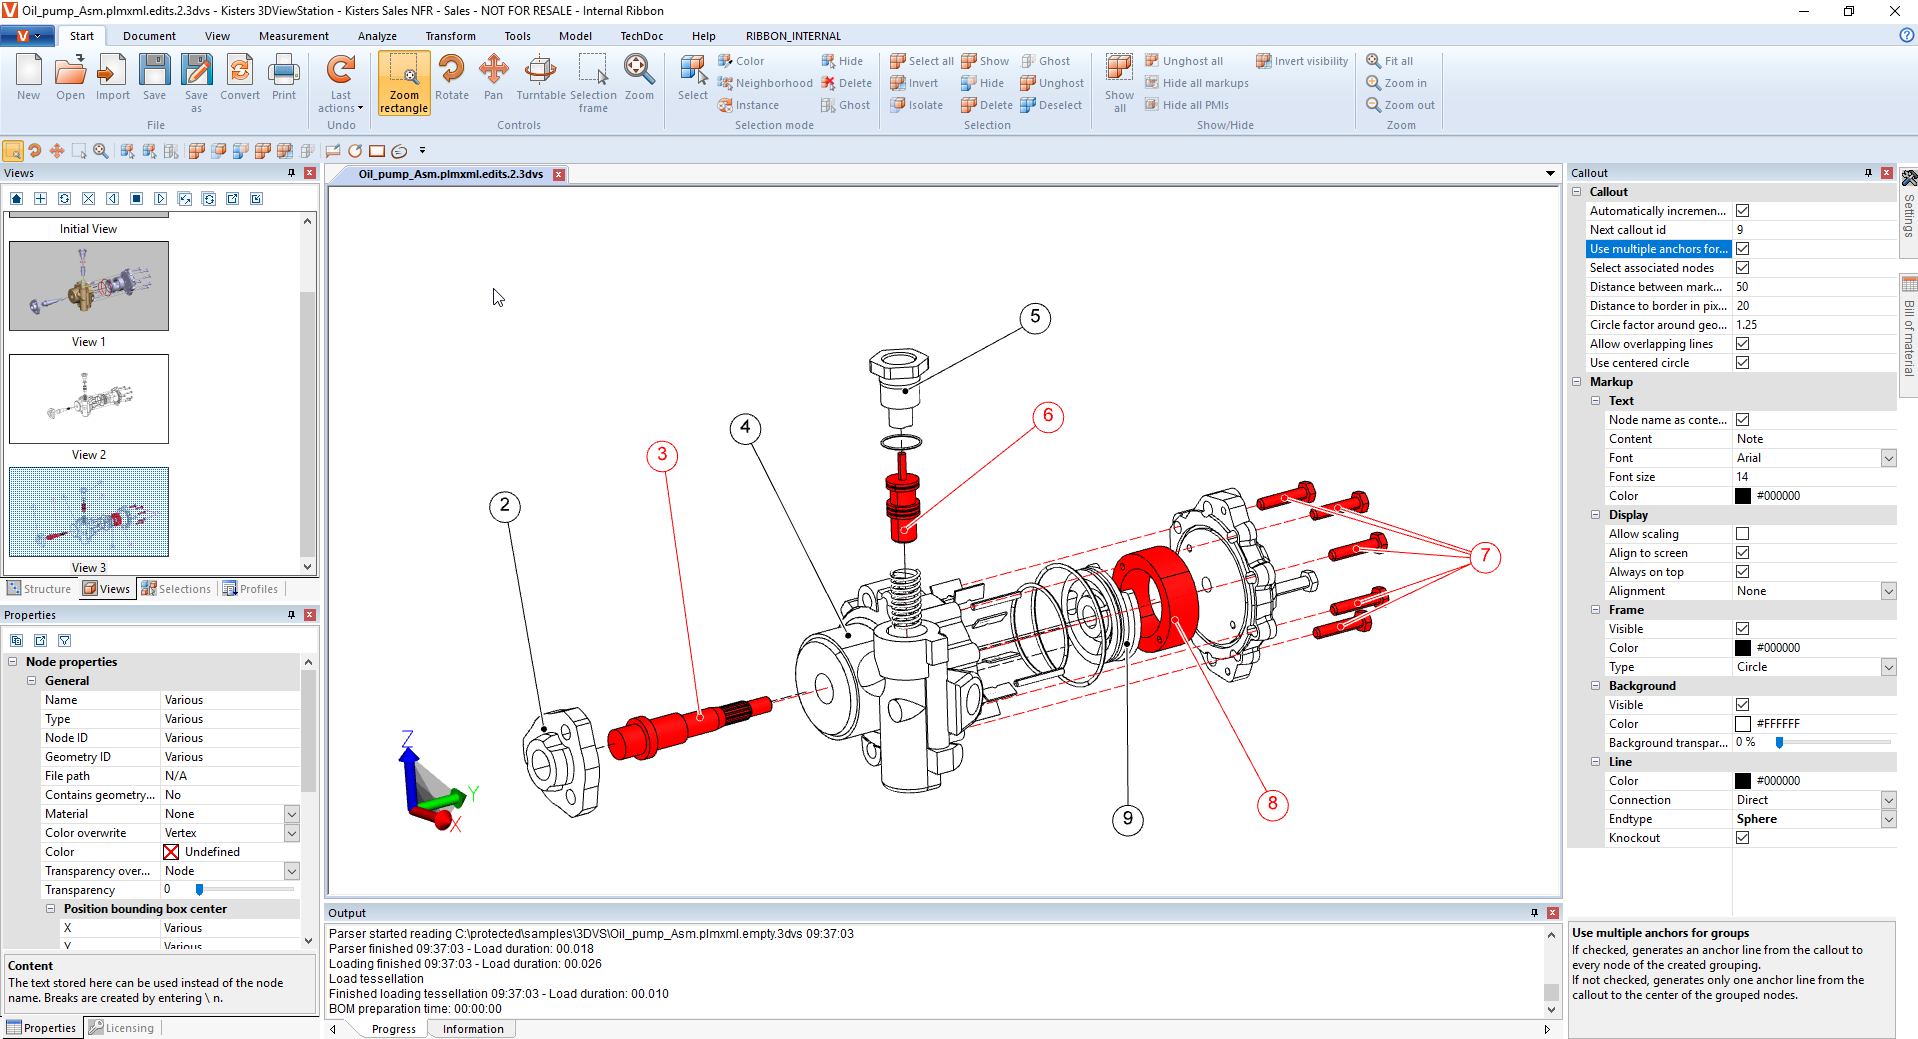 Authoring CAD data for technical documentation and spare part solutions